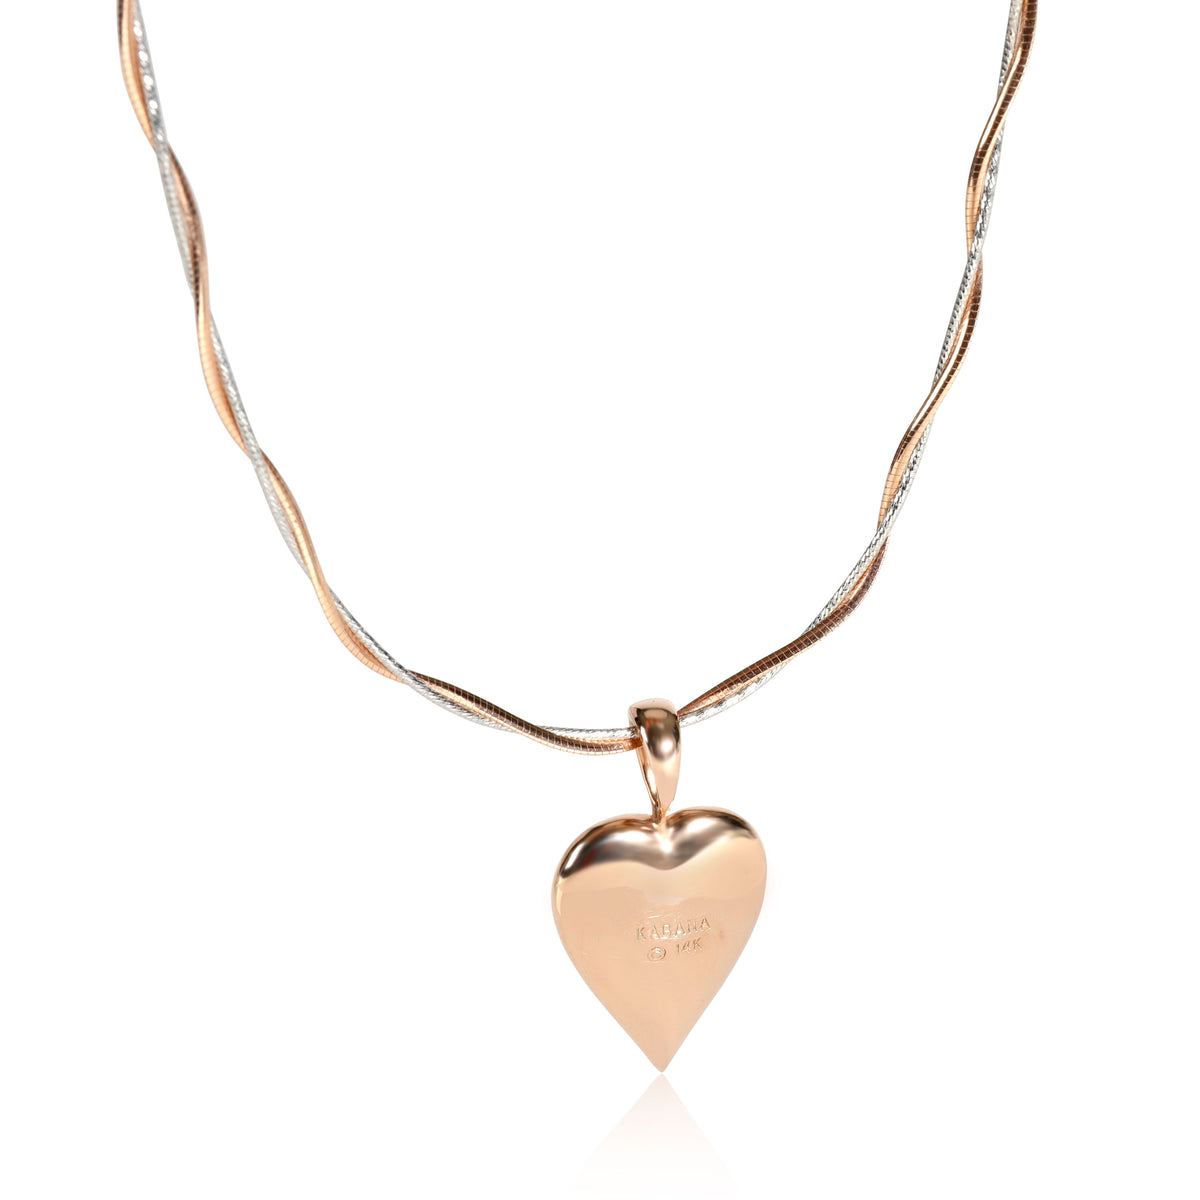 Pink Mother Of Pearl Heart Shape Diamond Necklace in 14K Rose Gold 1.00 CTW